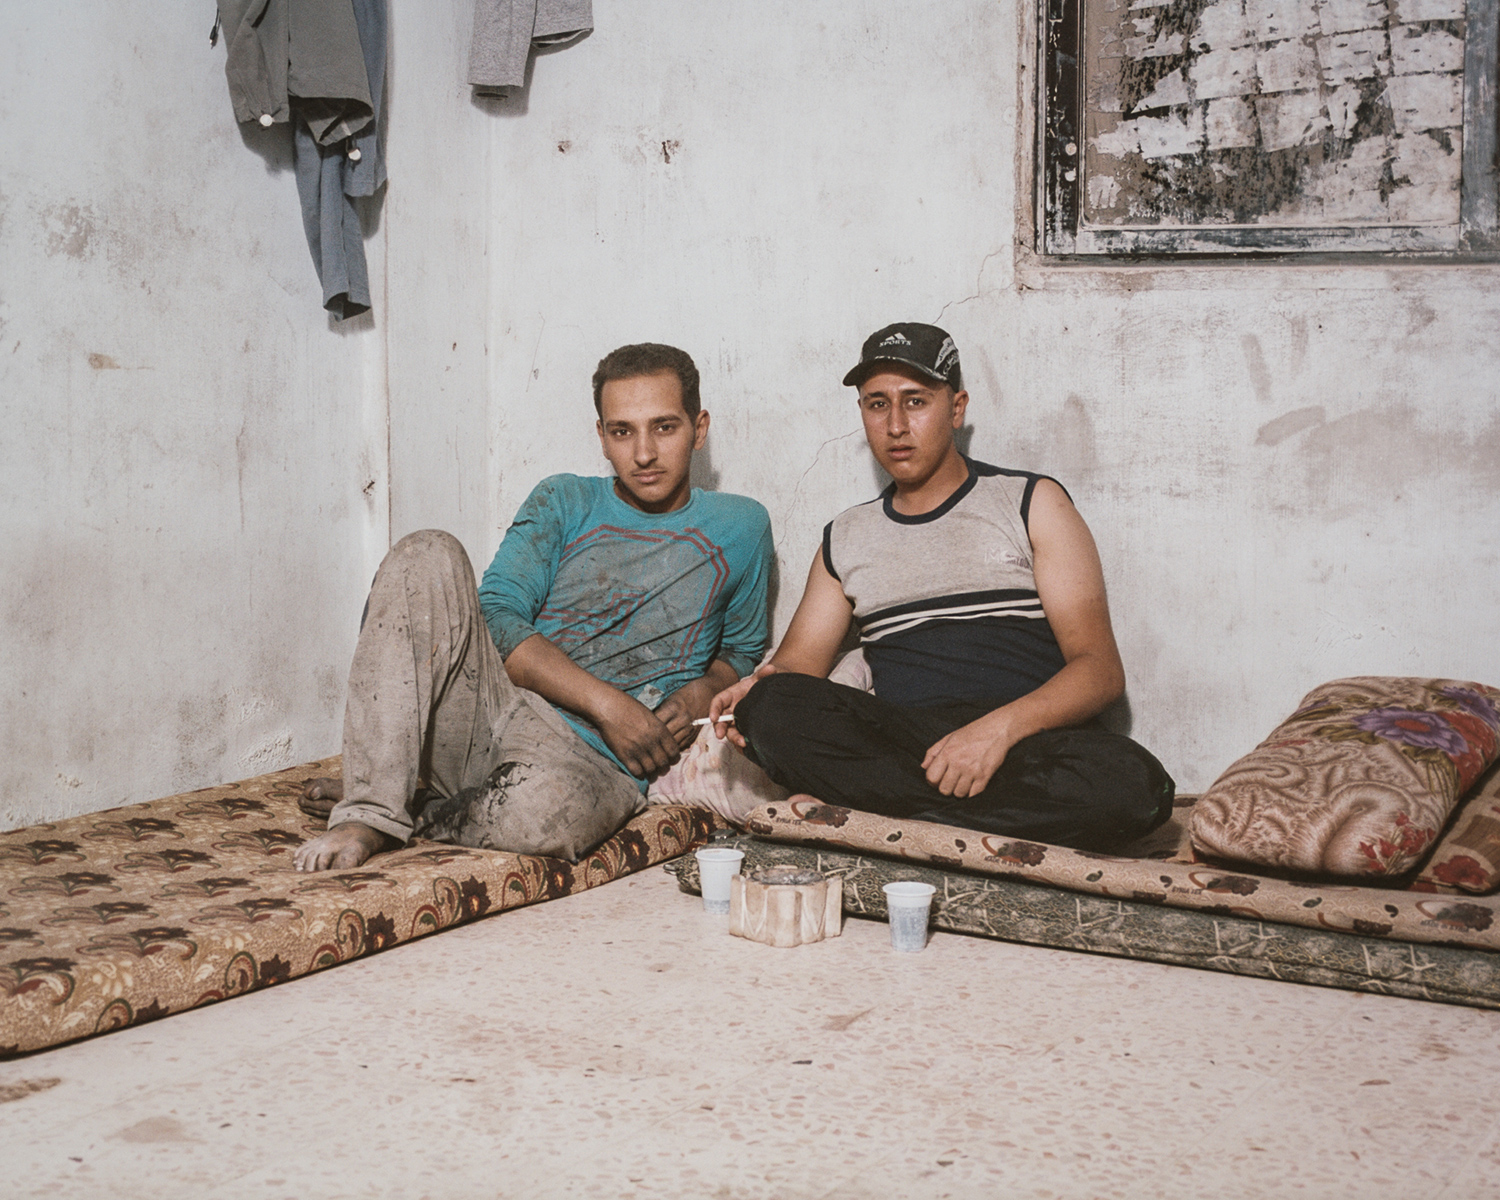 Syrian brothers Eyad and Mo'ayad Ghassan  Al-Jughmani in the room they share with three other foreign laborers in an apartment on the outskirts of Amman, Jordan. Both brothers work as day laborers in the area to earn money for their mother and young siblings, who also fled to Jordan and live elsewhere in the city.